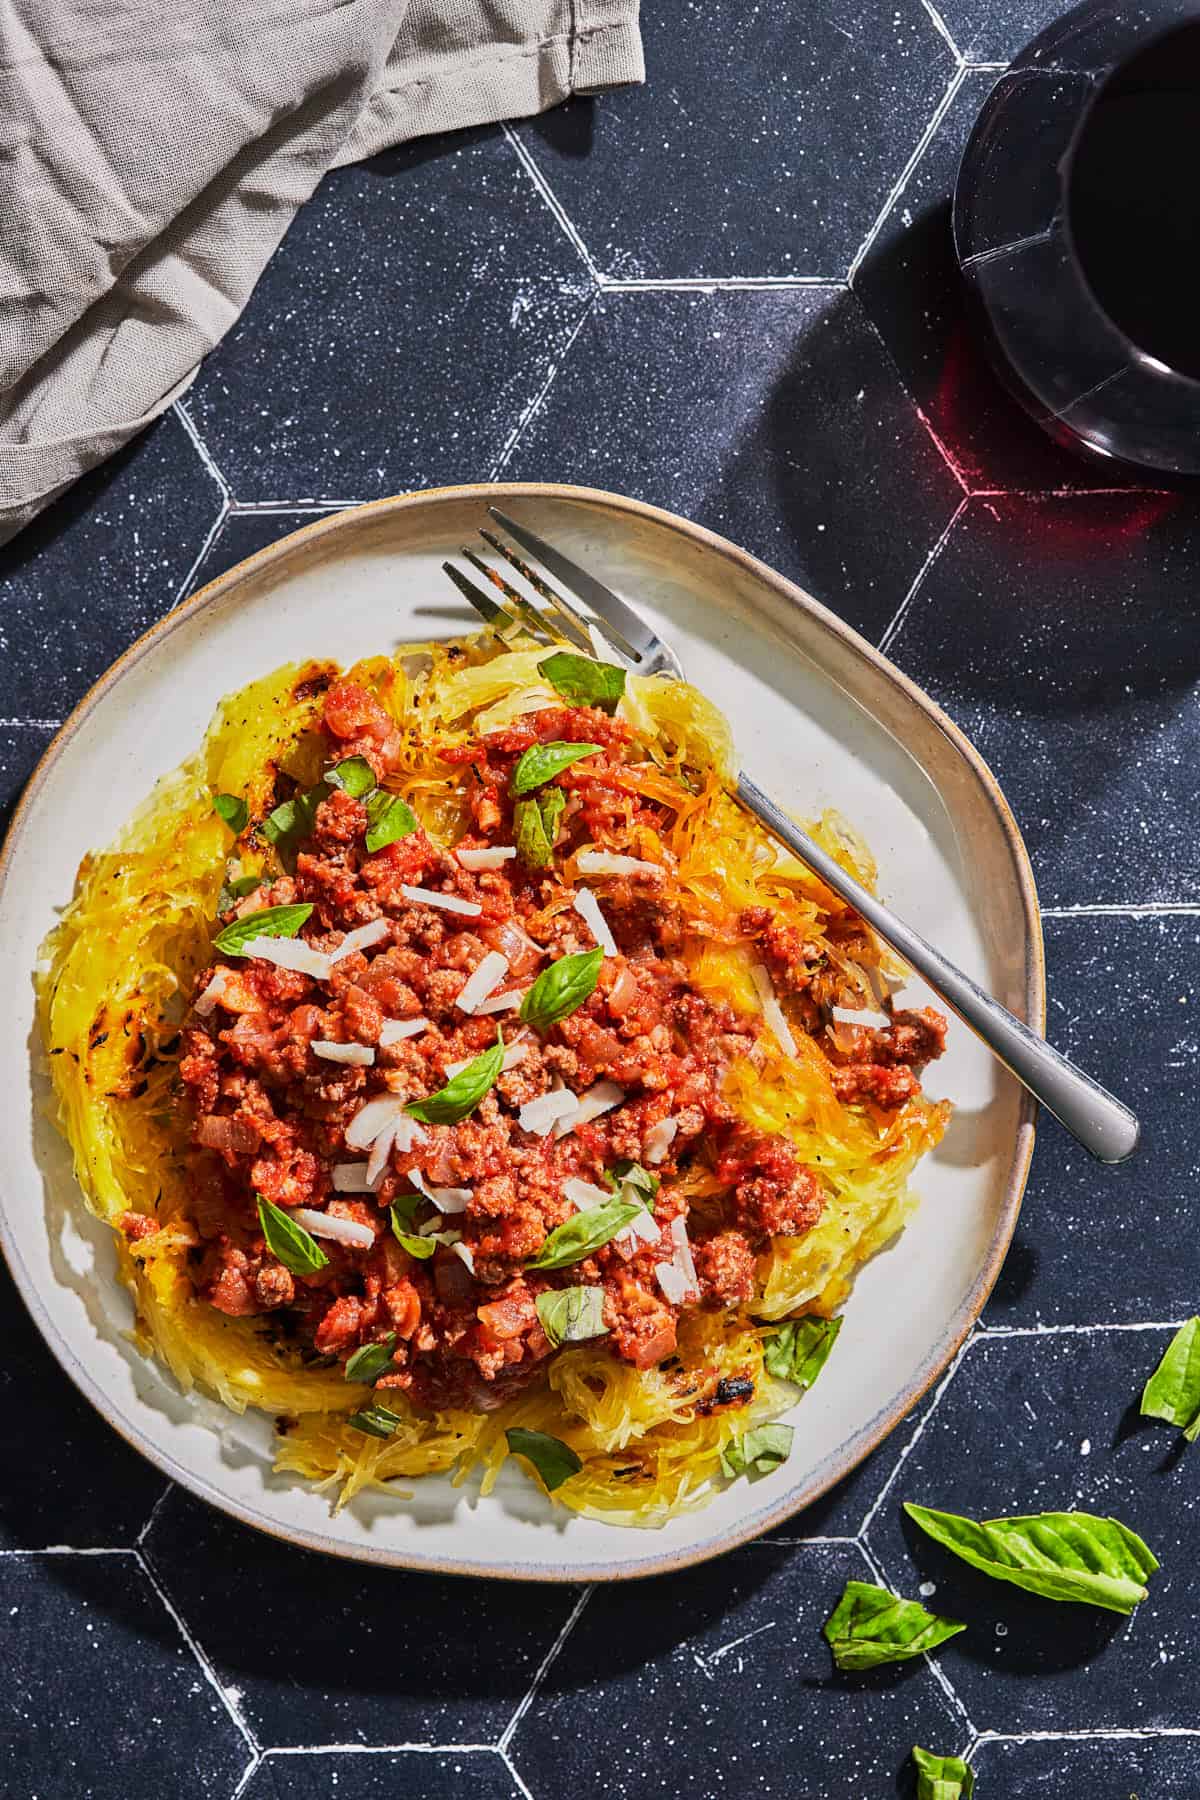 a plate of spaghetti squash topped with meat sauce and basil leaves